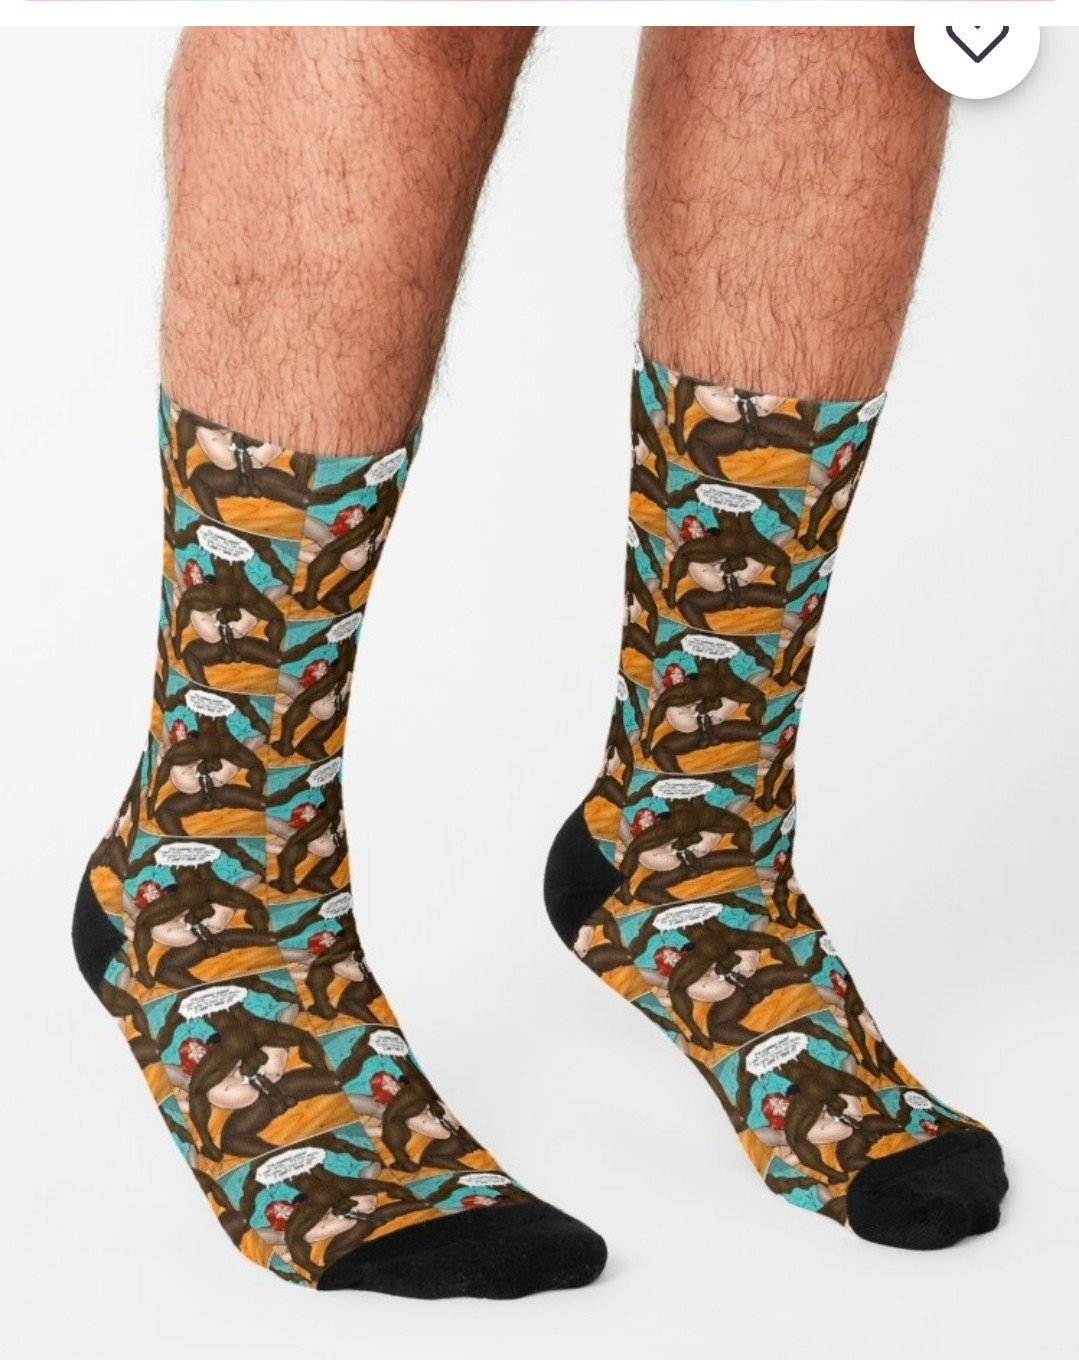 Watch the Photo by Niftywizard with the username @Niftywizard, who is a verified user, posted on October 8, 2023. The post is about the topic Cuckold. and the text says 'Hotwife socks!!!
https://www.redbubble.com/i/socks/Hotwife-sock-by-Detro10/153354876.9HZ1B'